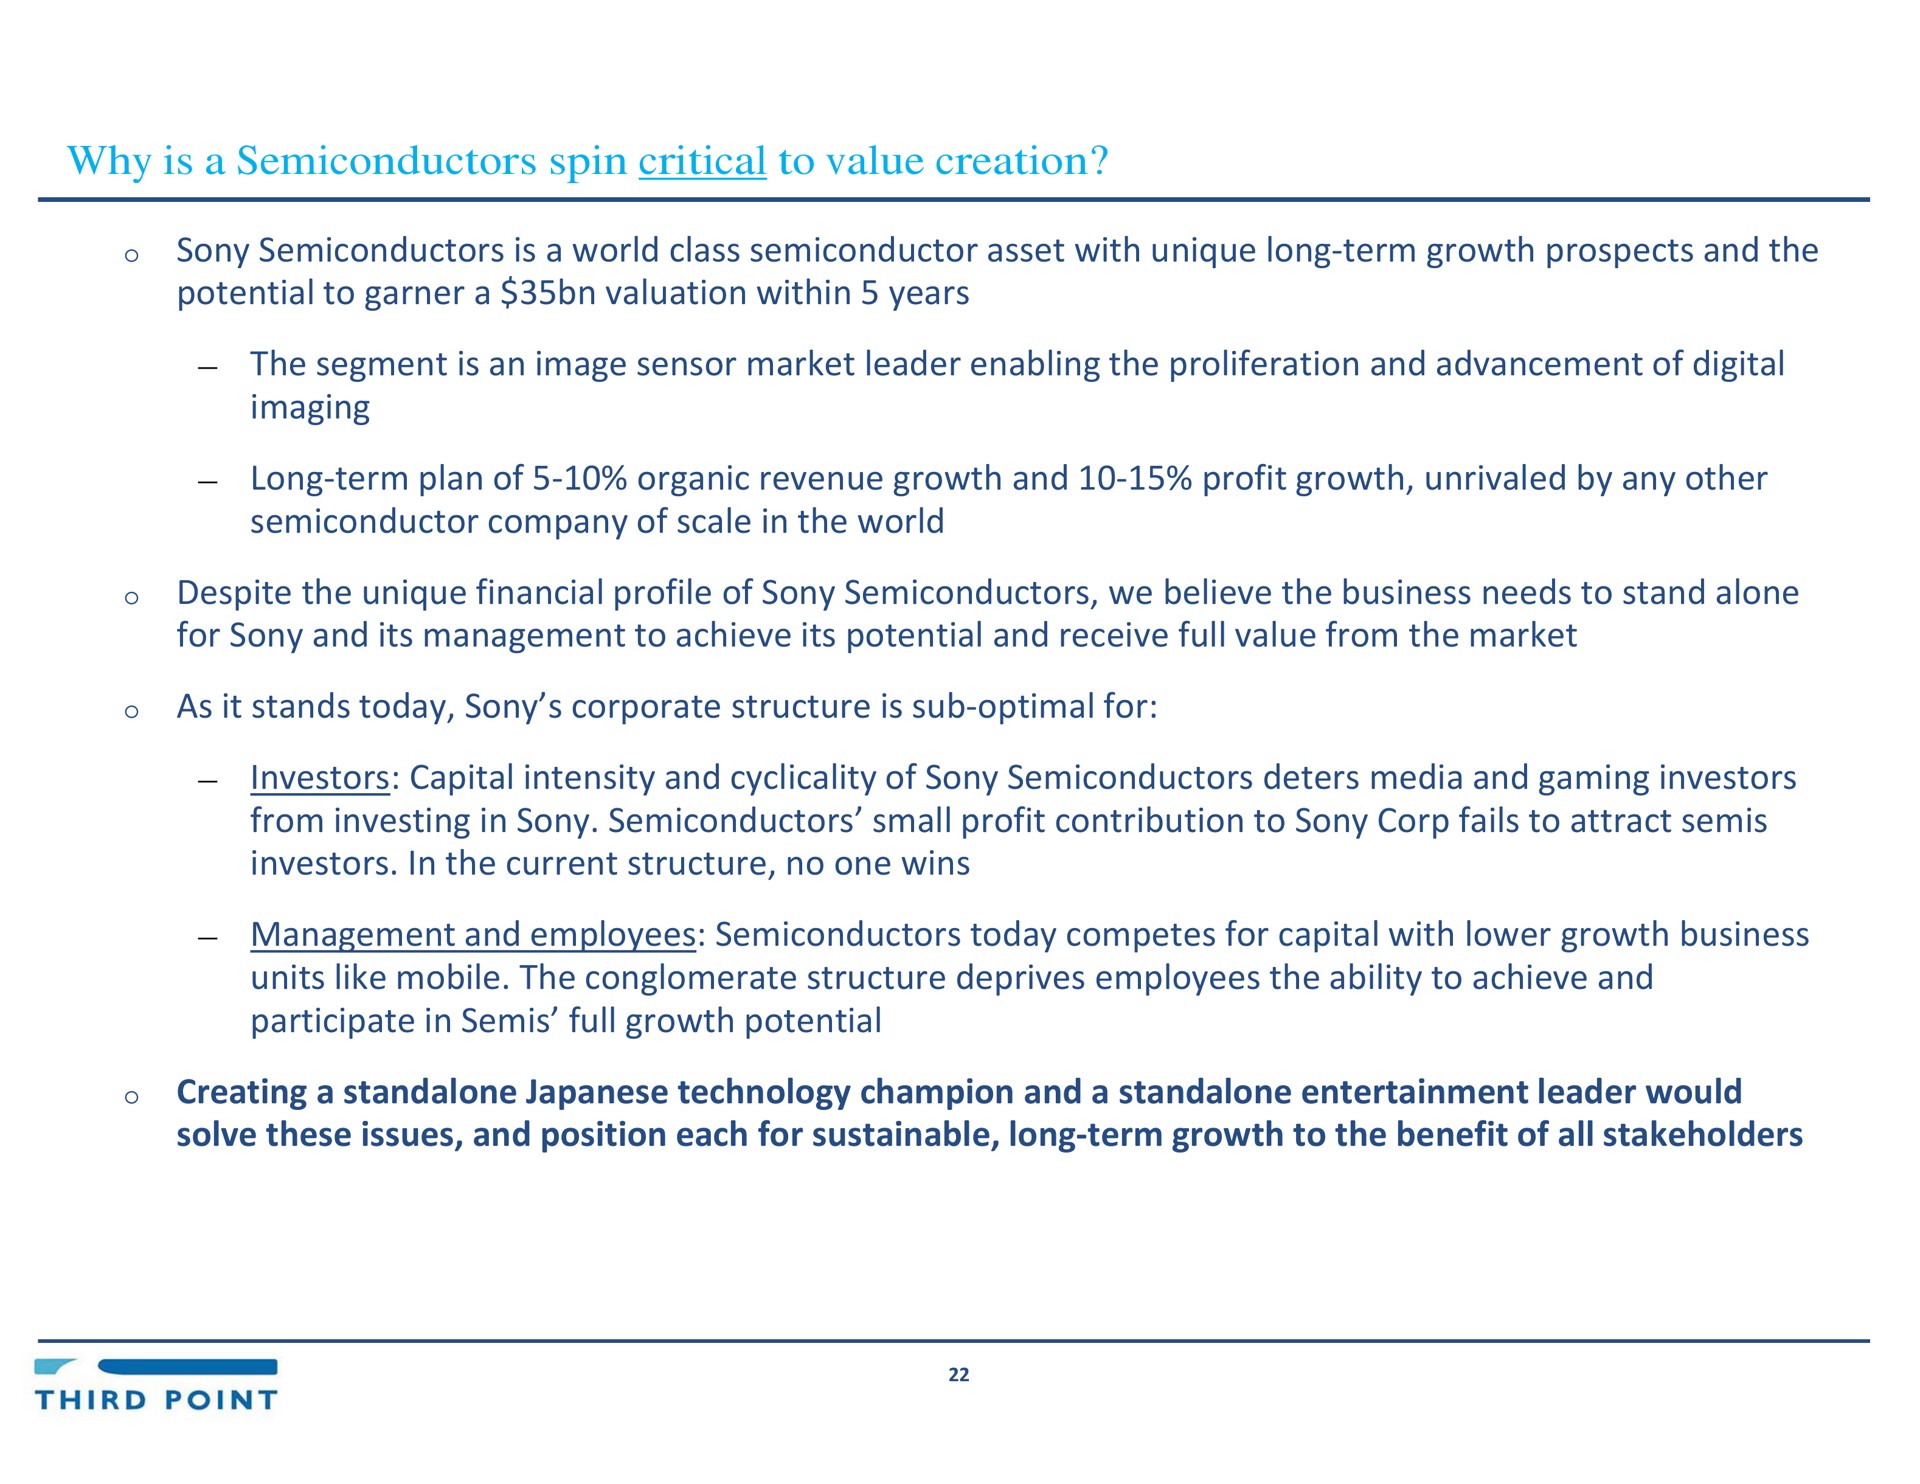 why is a semiconductors spin critical to value creation semiconductors is a world class semiconductor asset with unique long term growth prospects and the potential to garner a valuation within years the segment is an image sensor market leader enabling the proliferation and advancement of digital imaging long term plan of organic revenue growth and profit growth unrivaled by any other semiconductor company of scale in the world despite the unique financial profile of semiconductors we believe the business needs to stand alone for and its management to achieve its potential and receive full value from the market as it stands today corporate structure is sub optimal for investors capital intensity and of semiconductors deters media and gaming investors from investing in semiconductors small profit contribution to corp fails to attract semis investors in the current structure no one wins management and employees semiconductors today competes for capital with lower growth business units like mobile the conglomerate structure deprives employees the ability to achieve and participate in semis full growth potential creating a technology champion and a entertainment leader would solve these issues and position each for sustainable long term growth to the benefit of all stakeholders long term long term sub optimal long term | Third Point Management